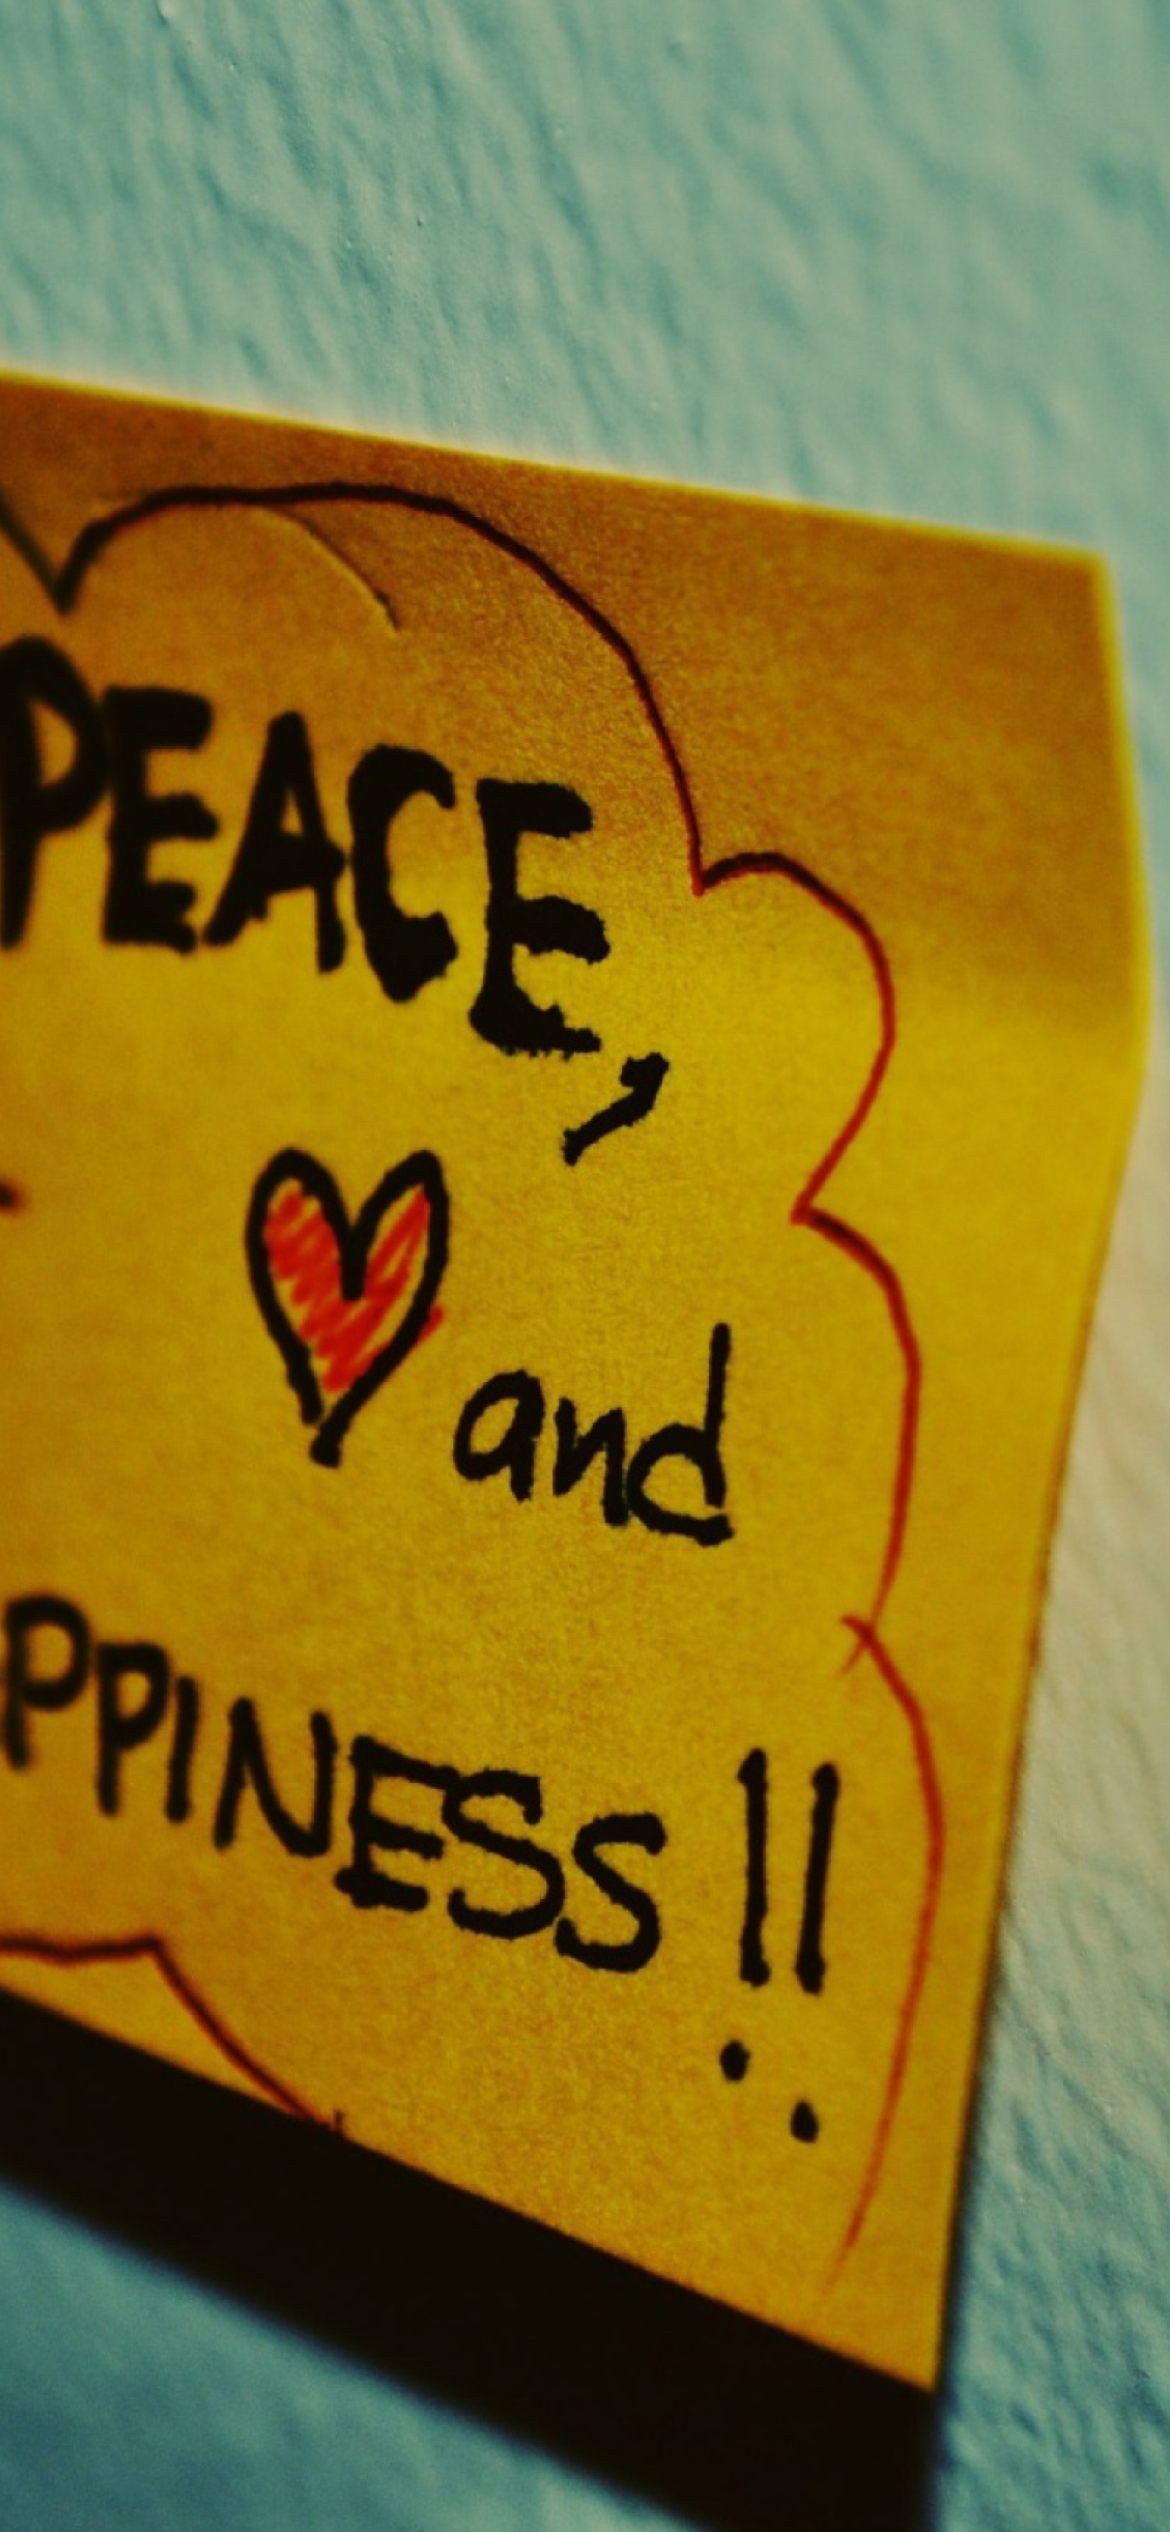 Peace Love And Happiness wallpaper 1170x2532